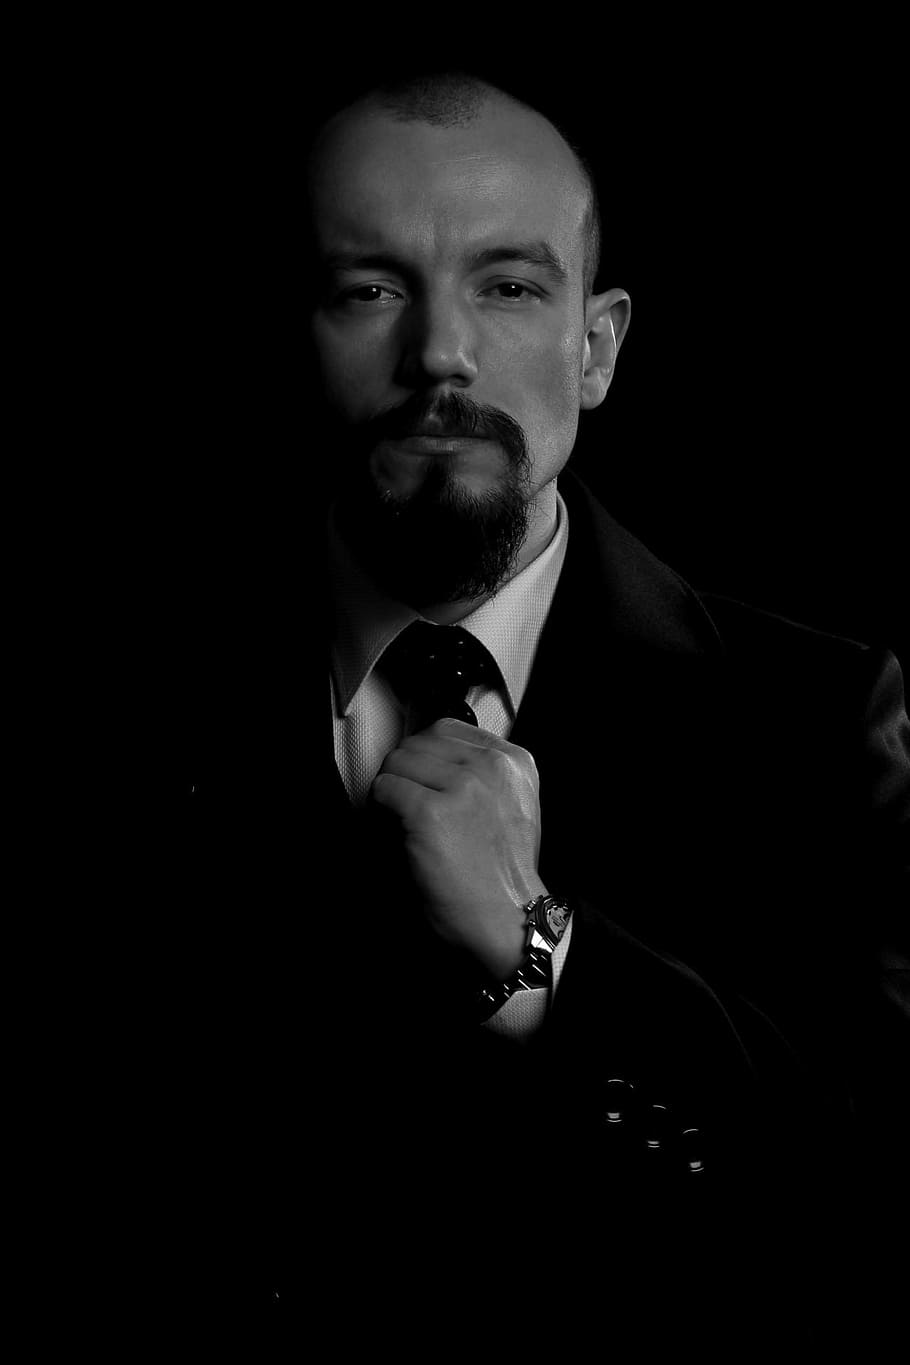 man, suit jacket, holding, necktie, grayscale photography, history, globalism, spiritual, age, boldness